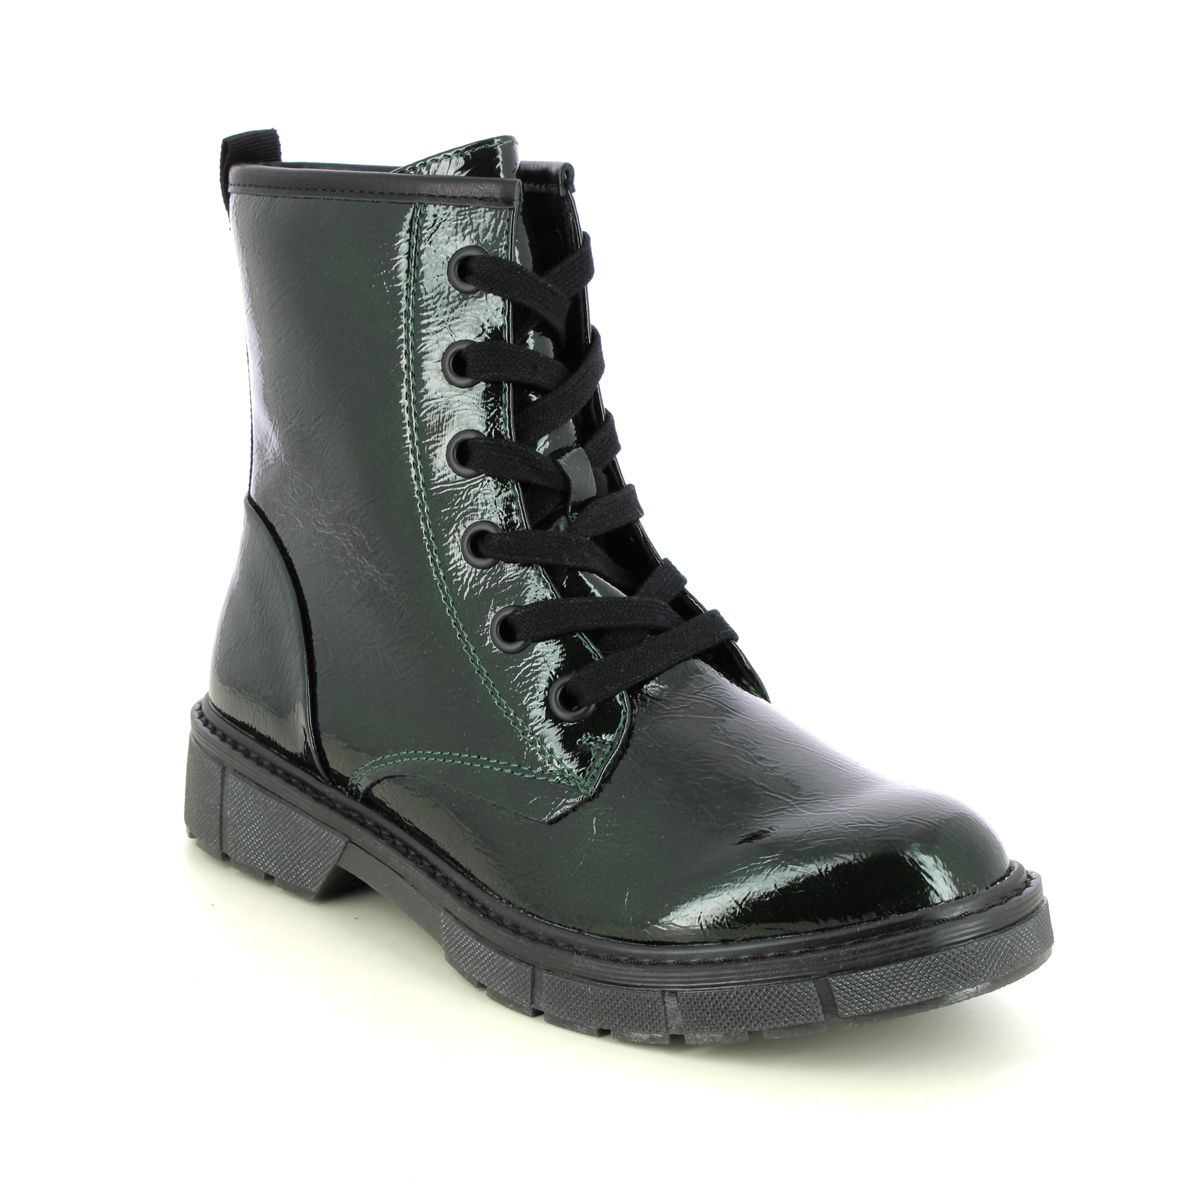 Marco Tozzi Badie Lace 25282-41-789 Green Patent Boots